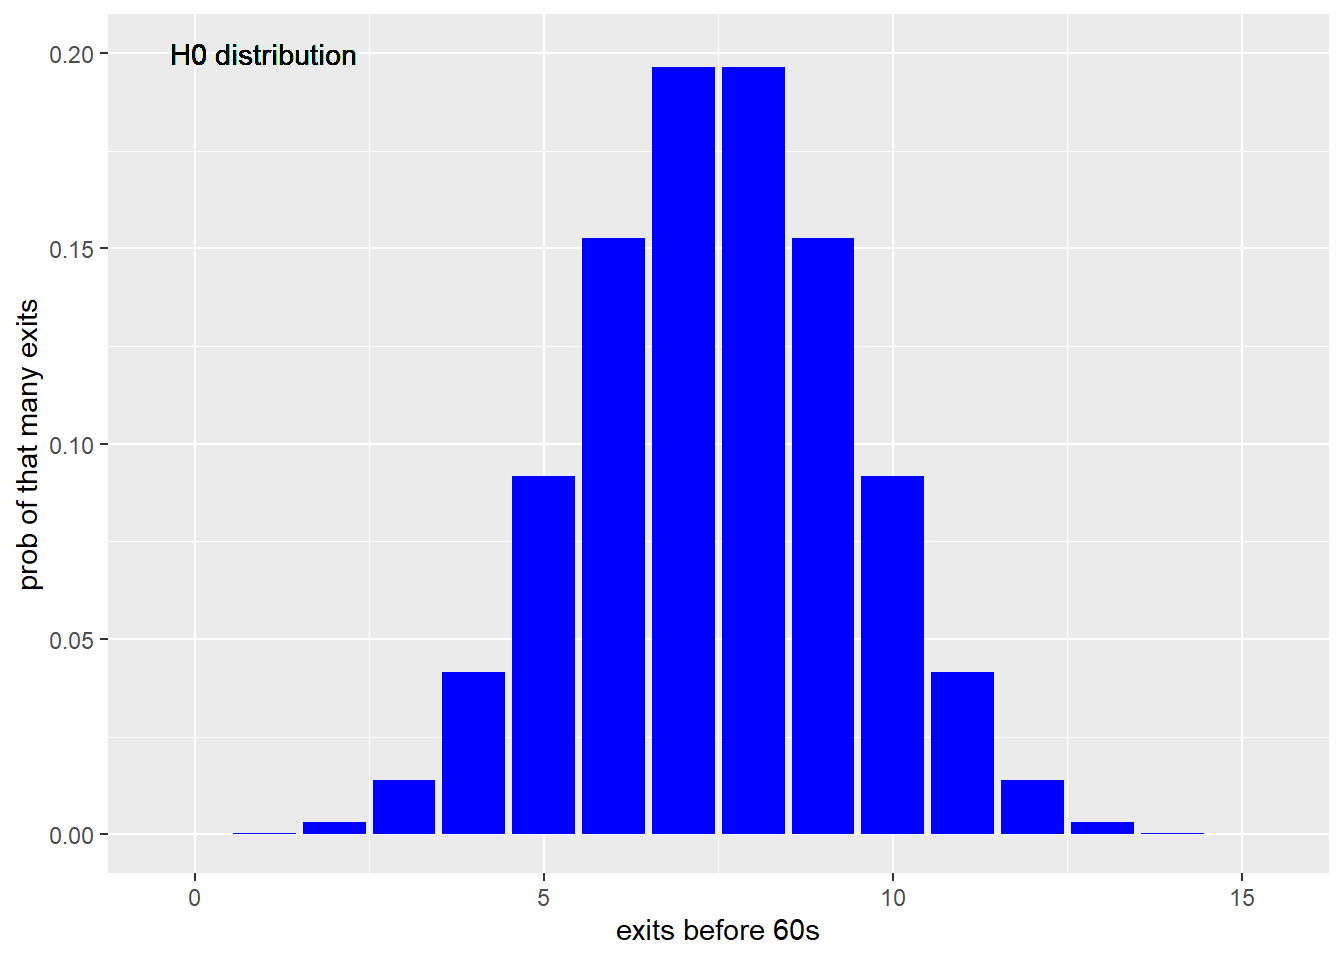 Distribution of chamber exits in a trial sized 15 for the null for a 50% chance of chamber exits priort to 60 seconds, on a binomial model.